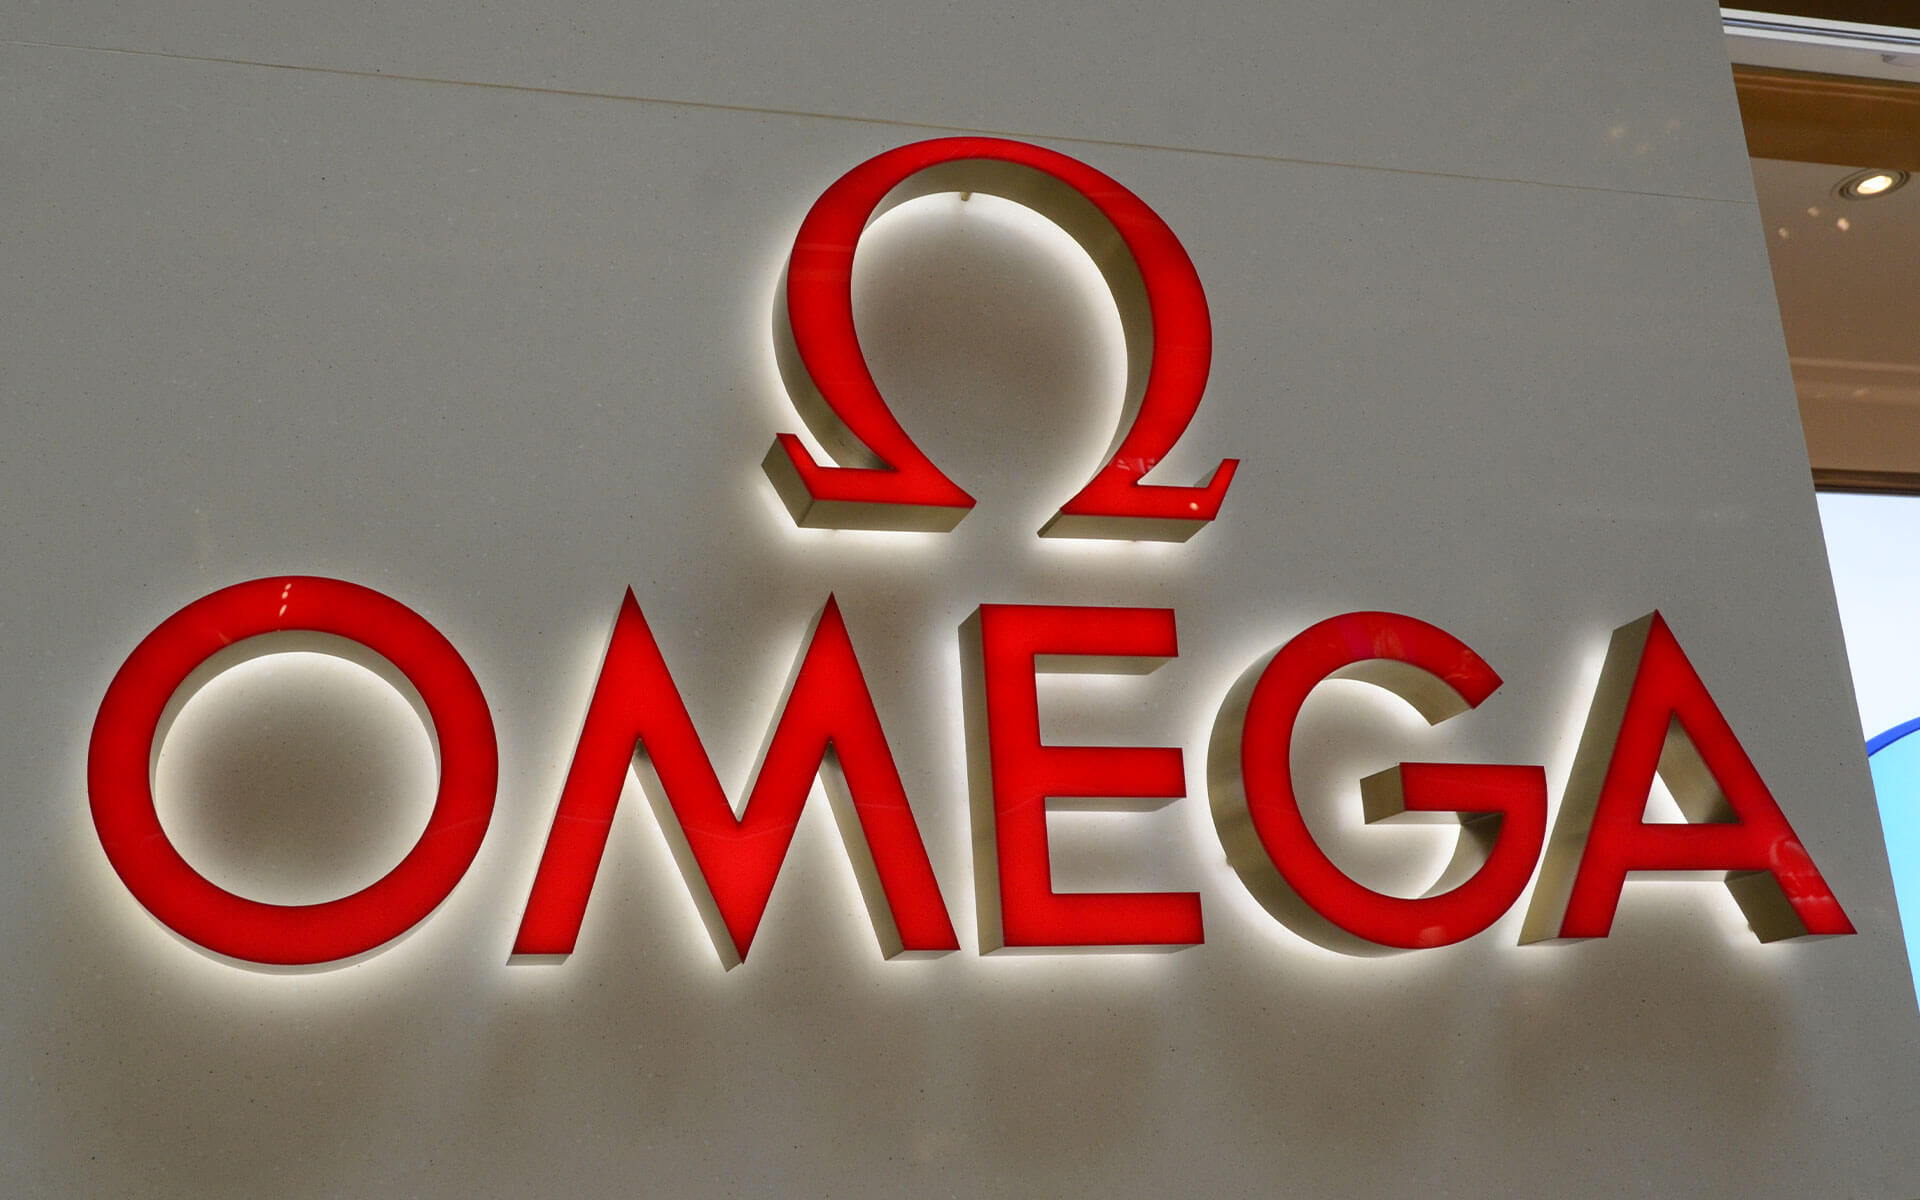 Face and Back-lit Metal Channel Letters for Omega